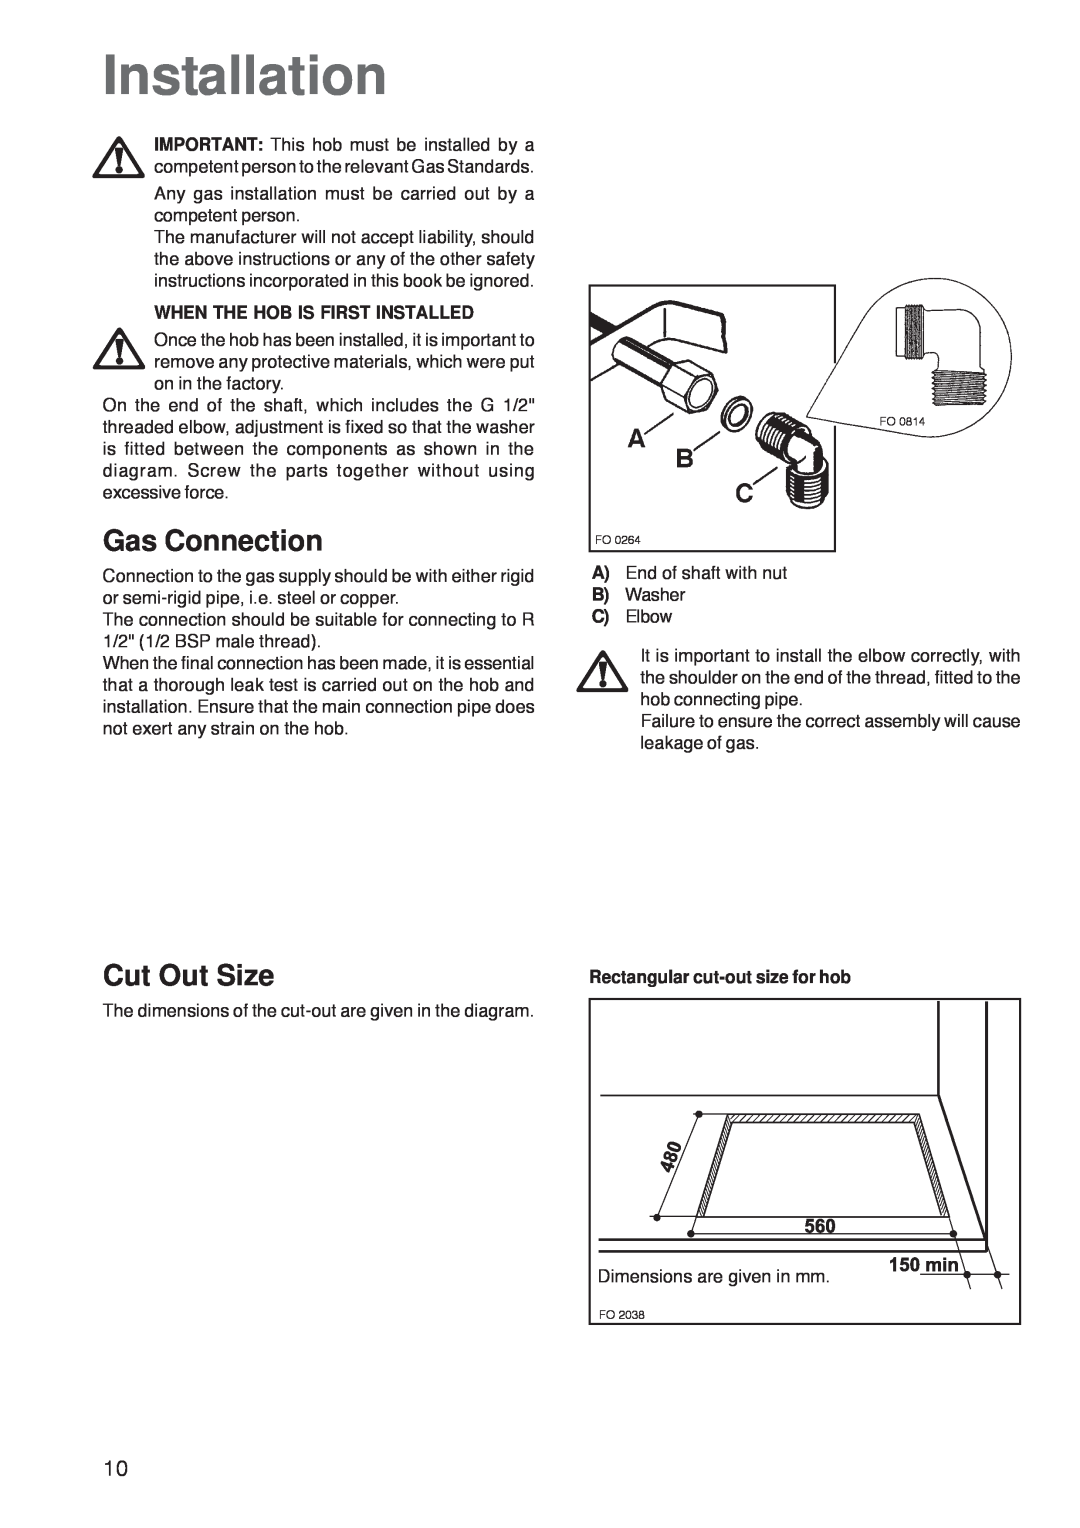 Zanussi ZGF 782 CTN, ZGF 782 CTX manual Installation, Gas Connection, Cut Out Size, When The Hob Is First Installed 